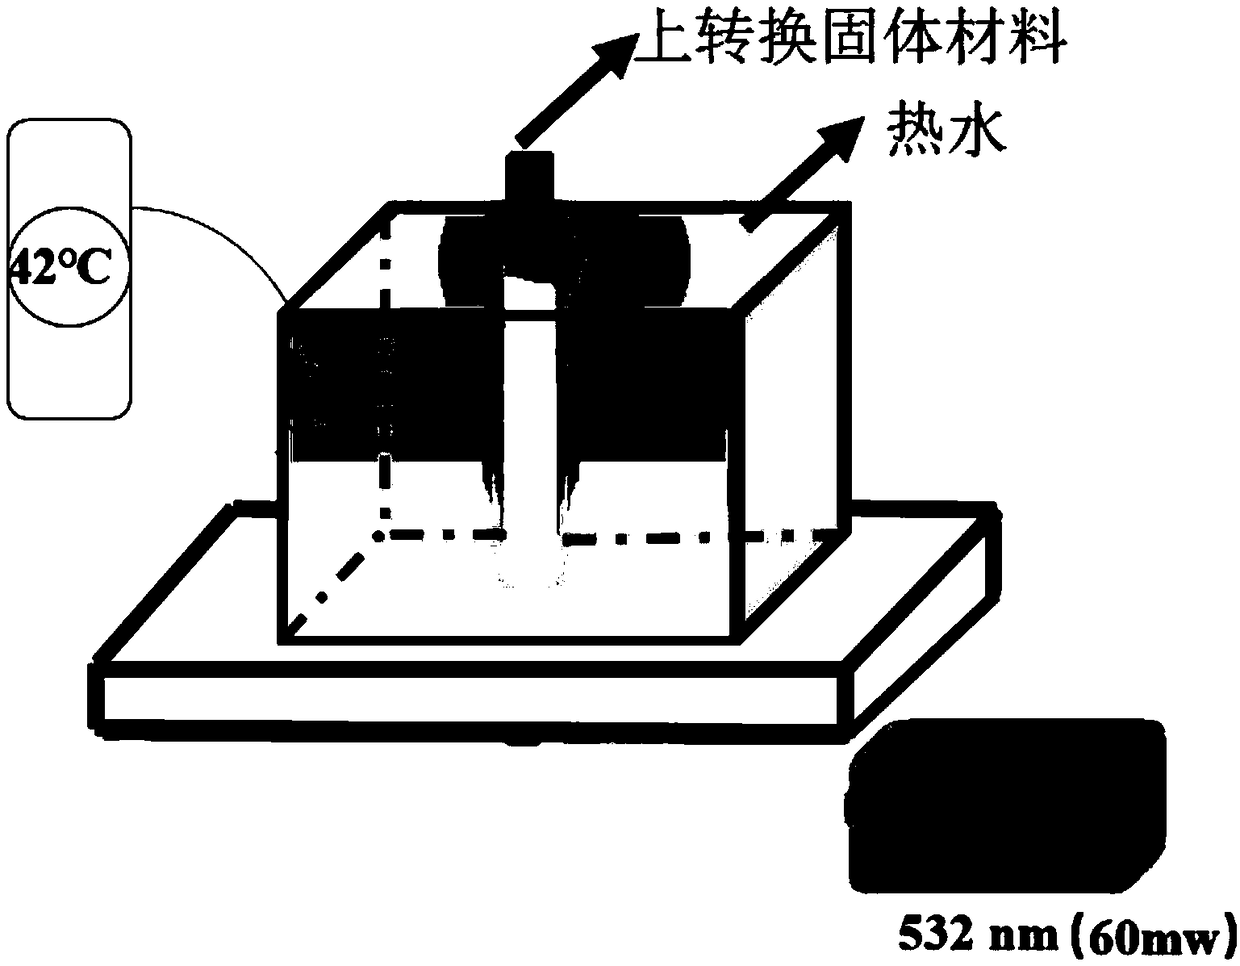 Up-conversion white light solid material and application thereof in producing white light